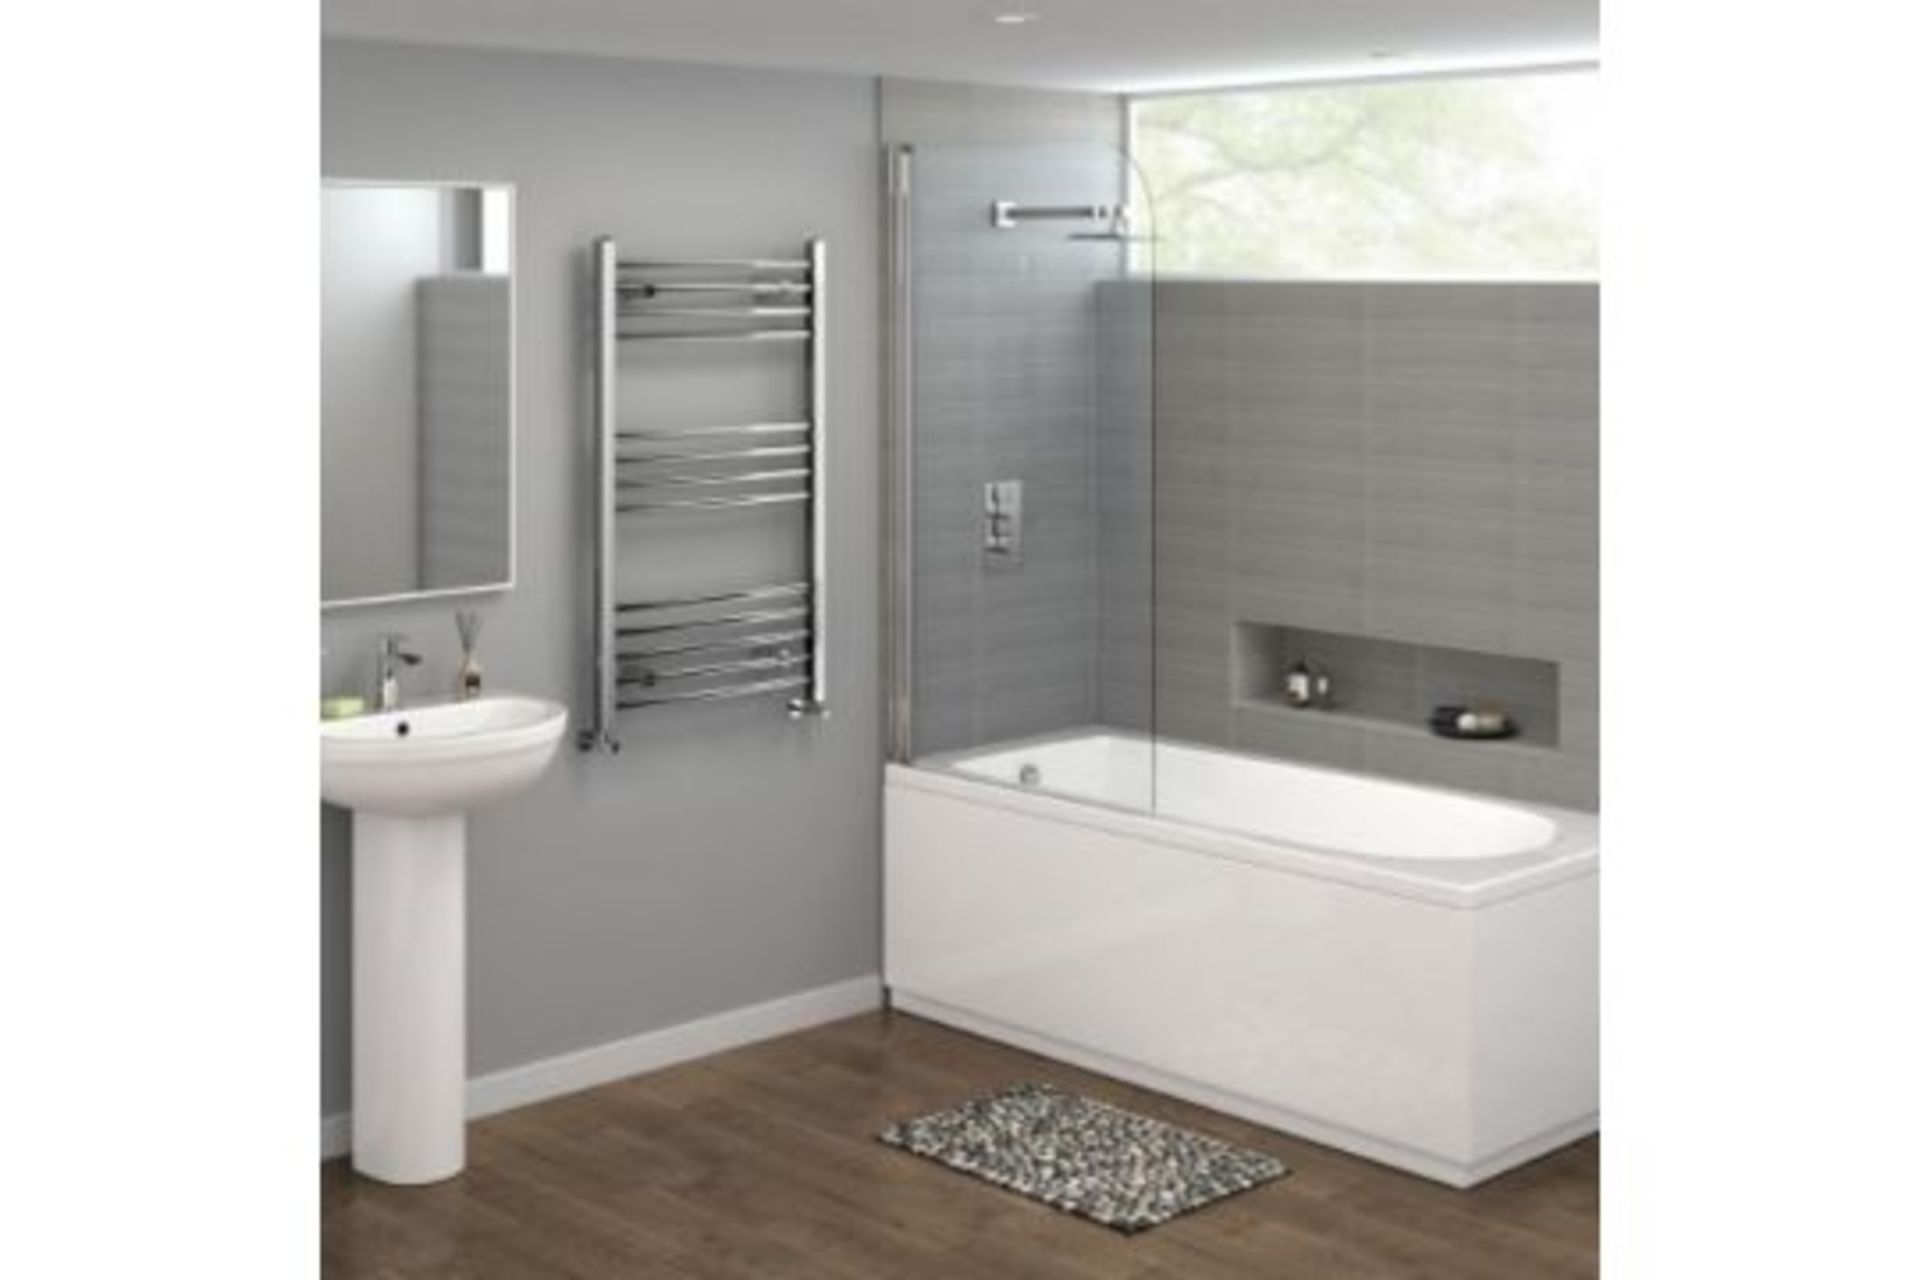 New & Boxed 1200X500Mm - 20Mm Tubes - Rrp £219.99. - Image 2 of 2